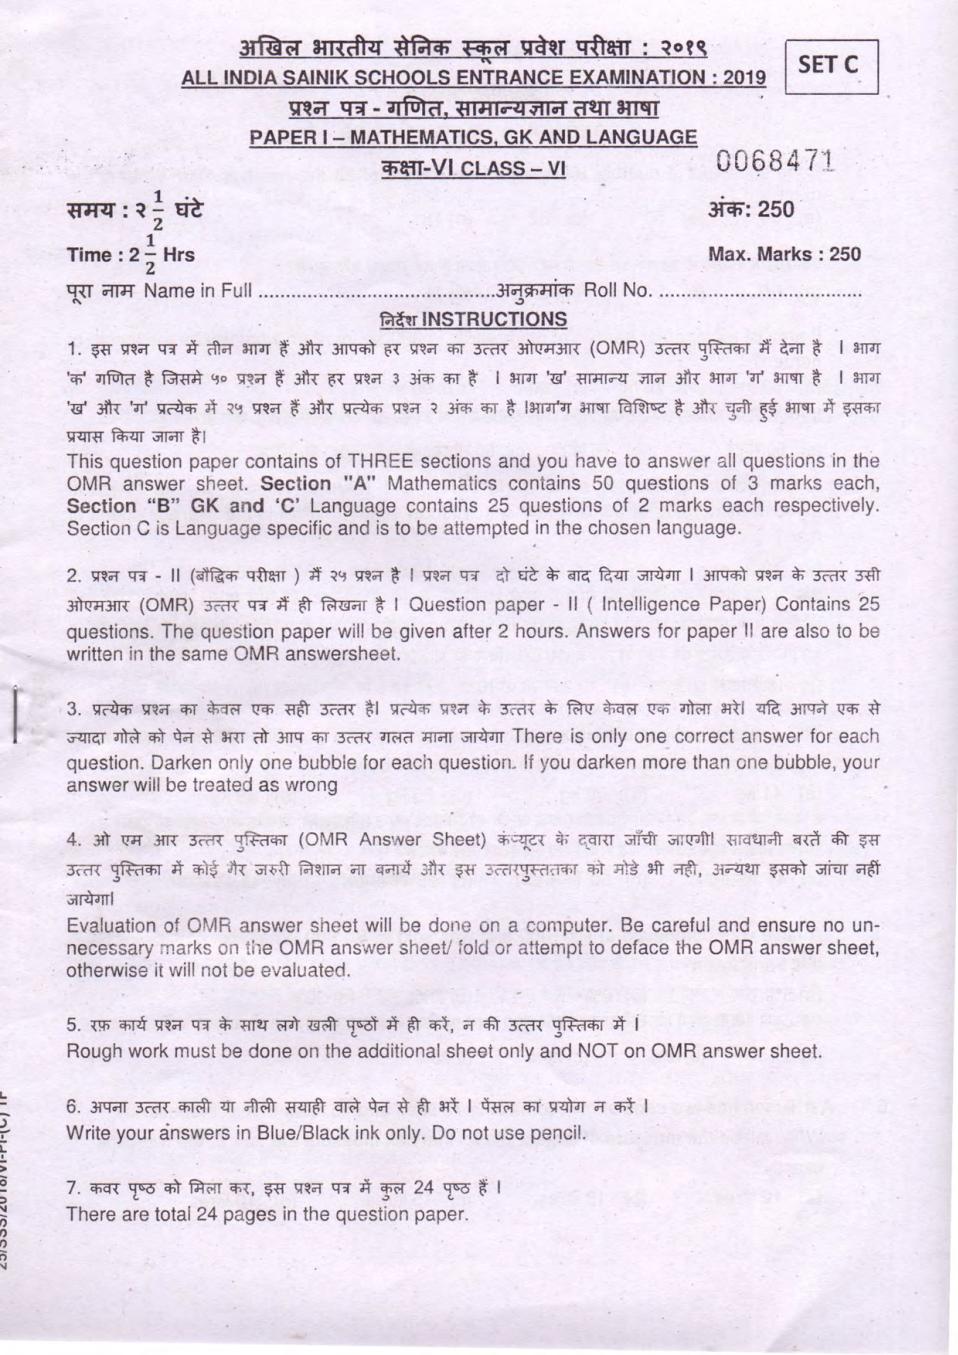 School Entrance Exam Sample Paper for Class 6 (AISSEE) - Page 1